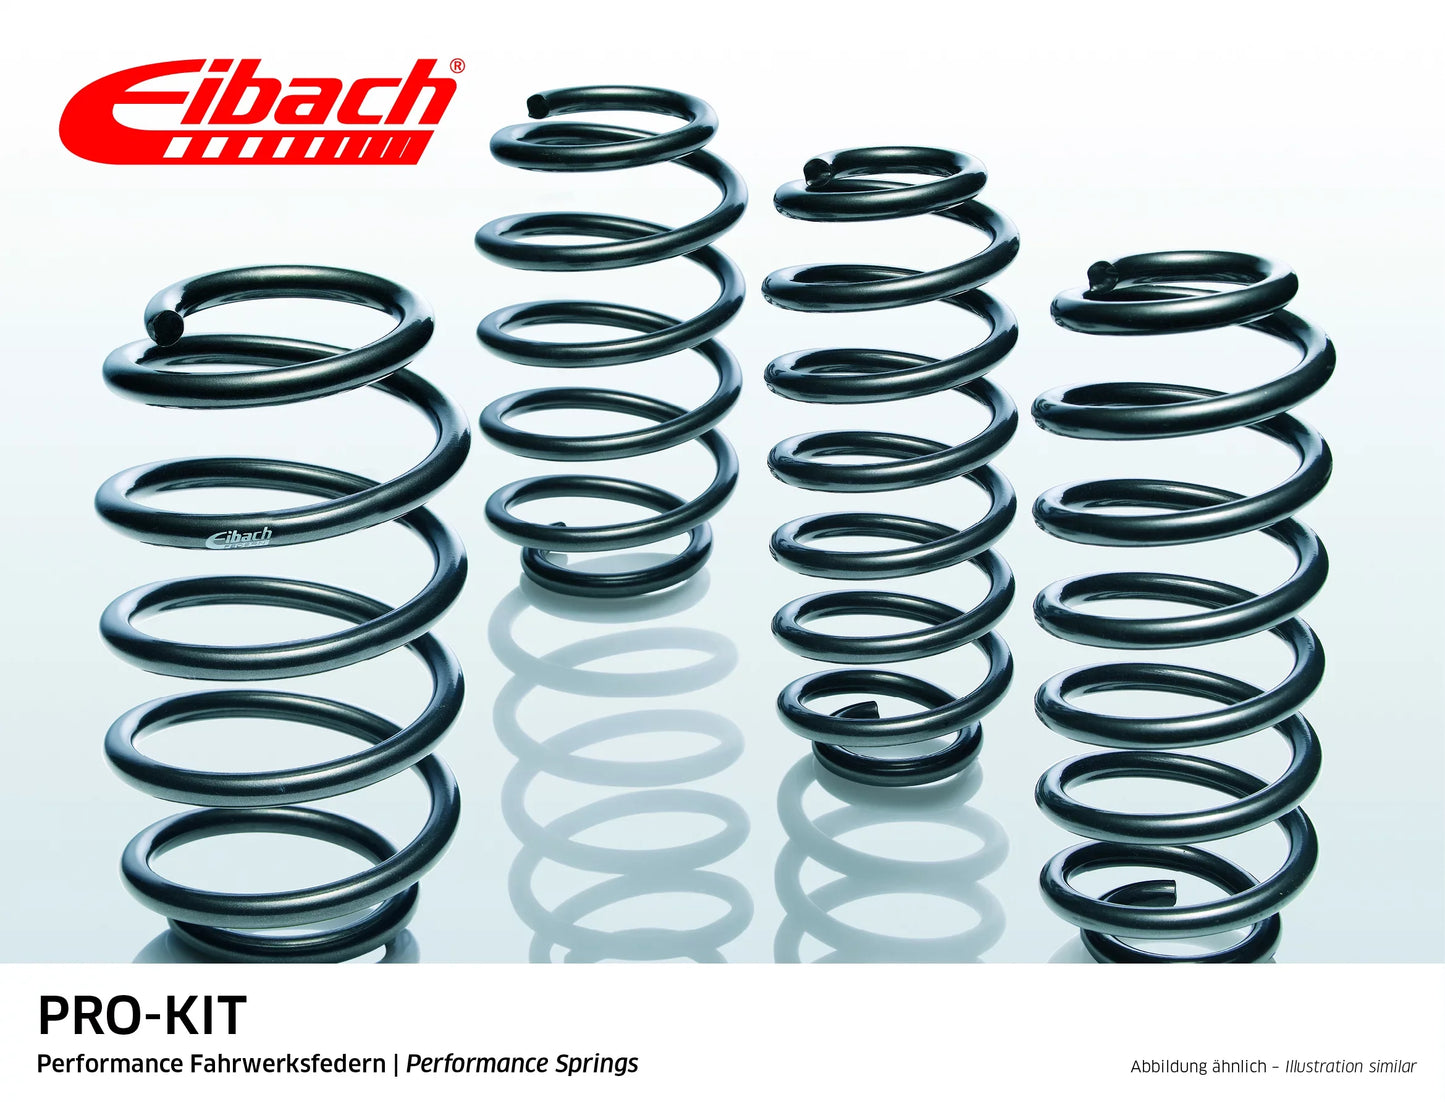 Eibach Pro-Kit Lowering Springs (E10-55-015-03-22) at £283.00